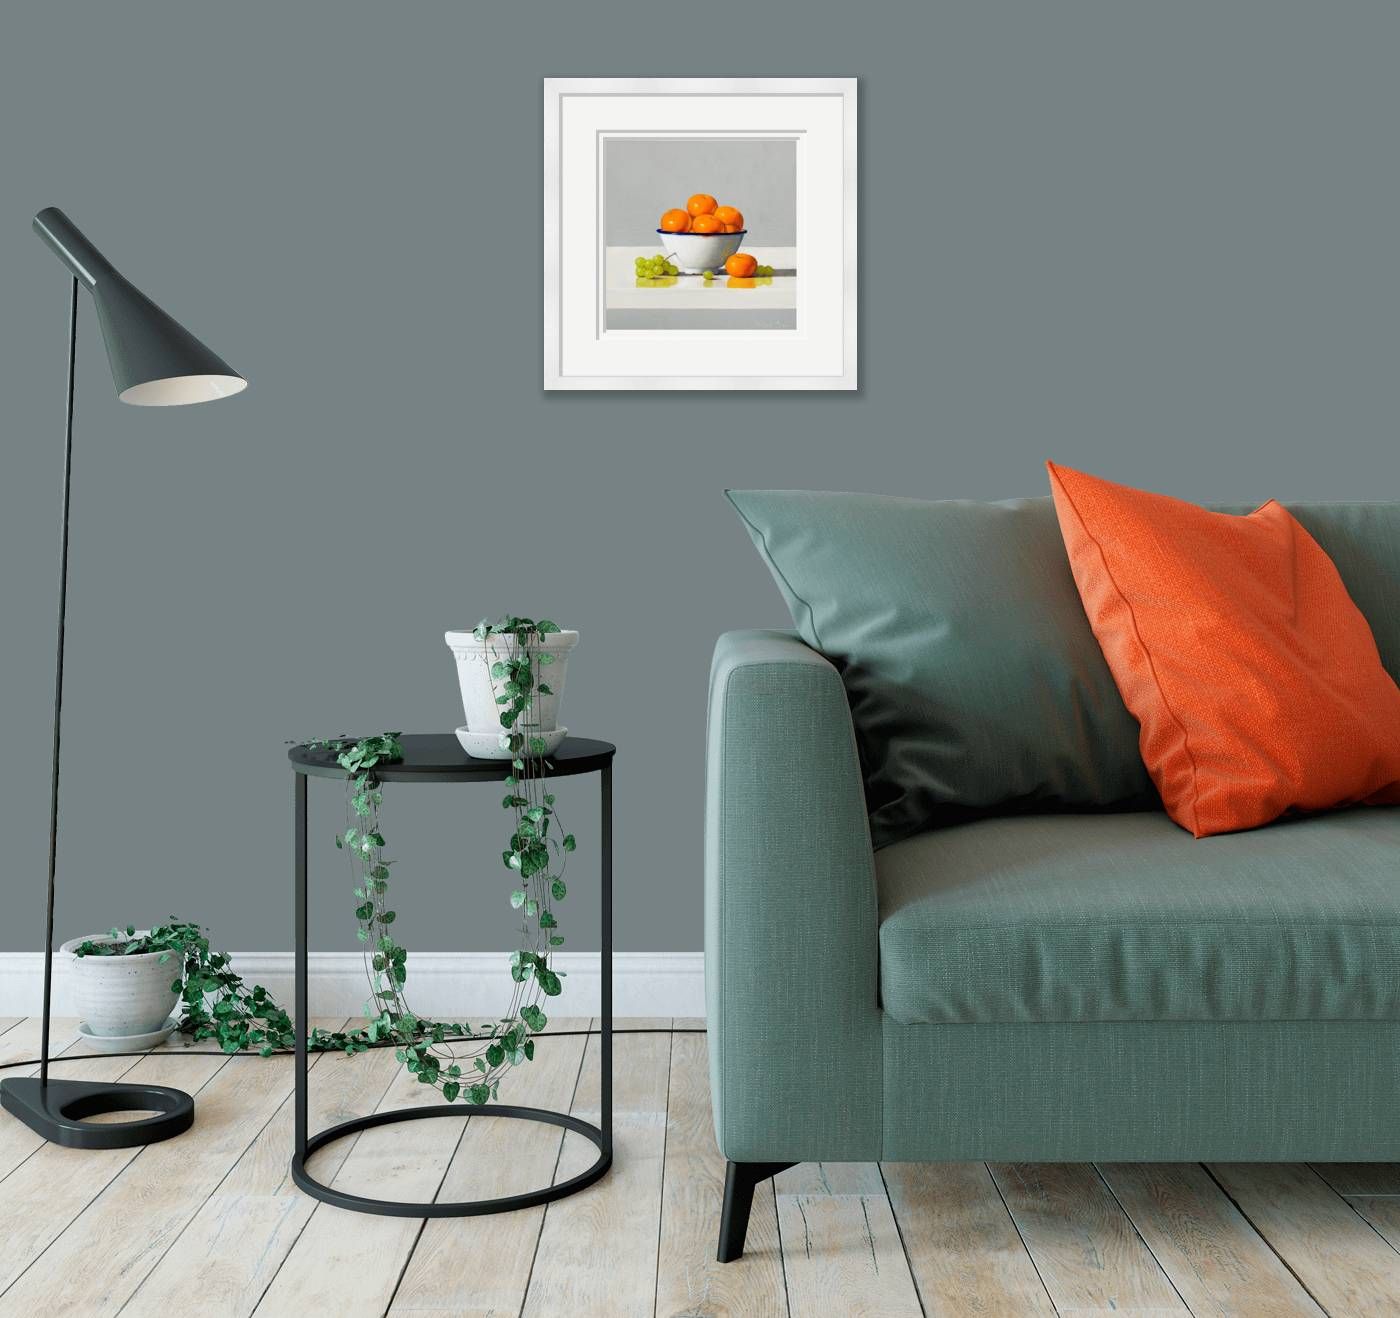 Small framed - Bowl of Oranges & Grapes by Peter Dee